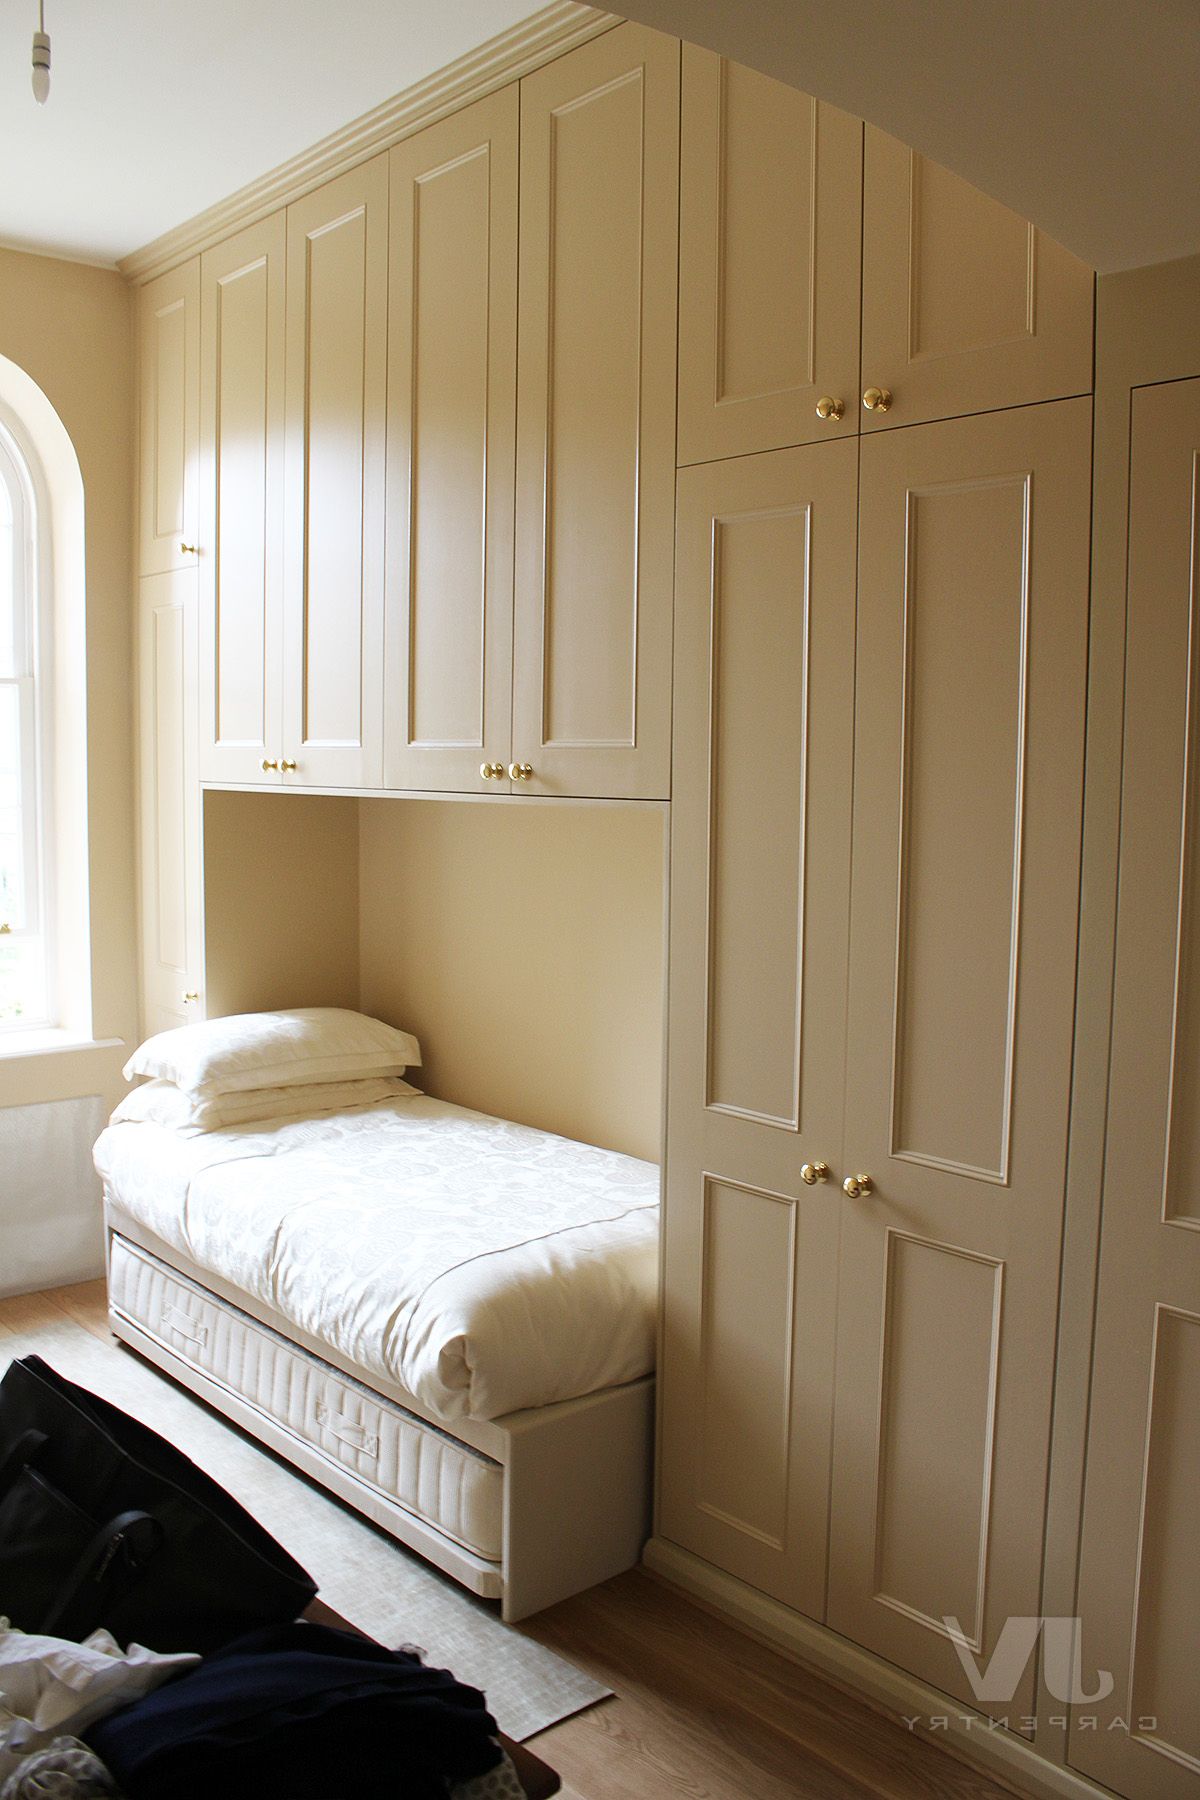 12 Fitted Wardrobes Over Bed Ideas For Your Bedroom | Jv Carpentry Intended For Over Bed Wardrobes Sets (View 10 of 20)